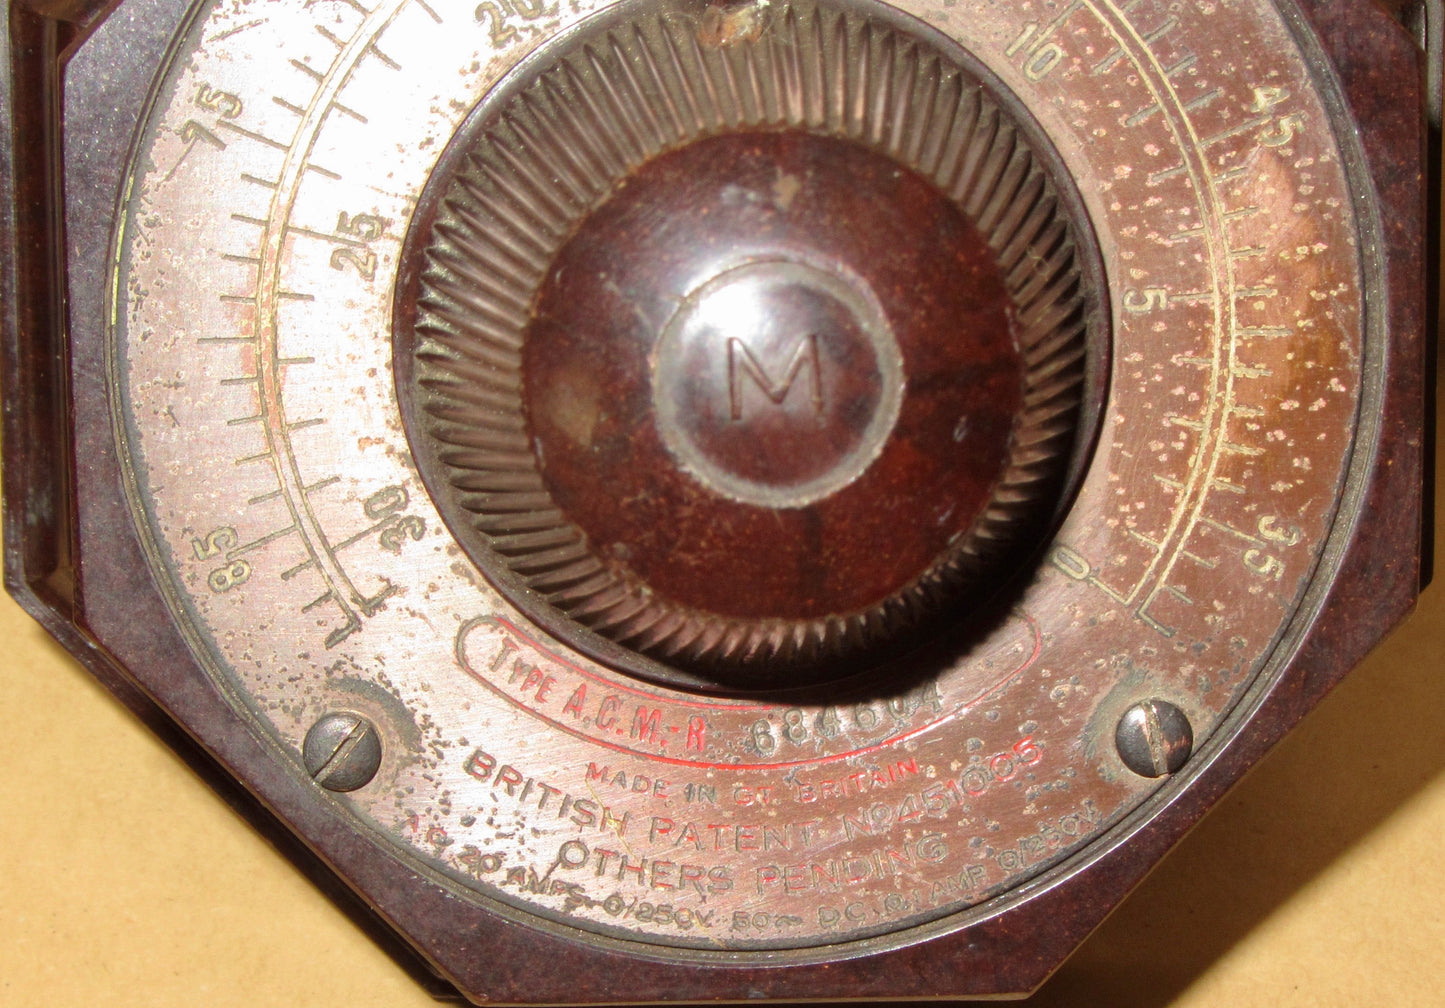 1930s Type ACM-R Bakelite Room Thermostat With Fahrenheit And Centigrade Scale Made By Robert Maclaren